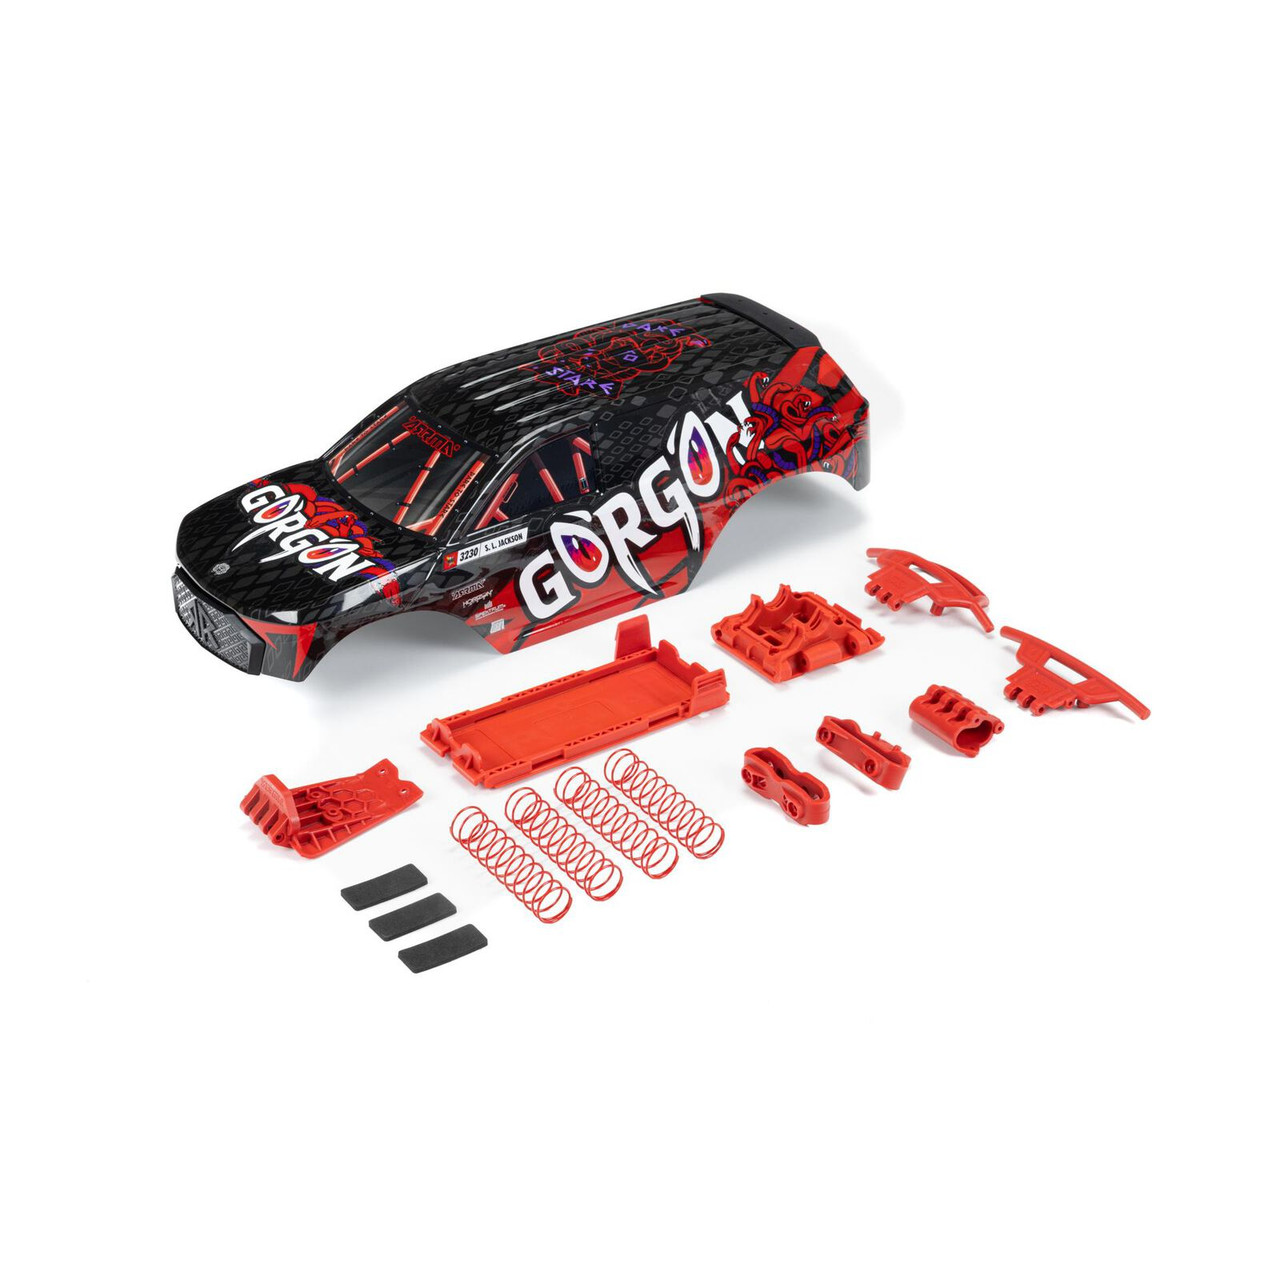 Arrma 402354 GORGON Painted Decaled Trimmed Body Set, Black / Red